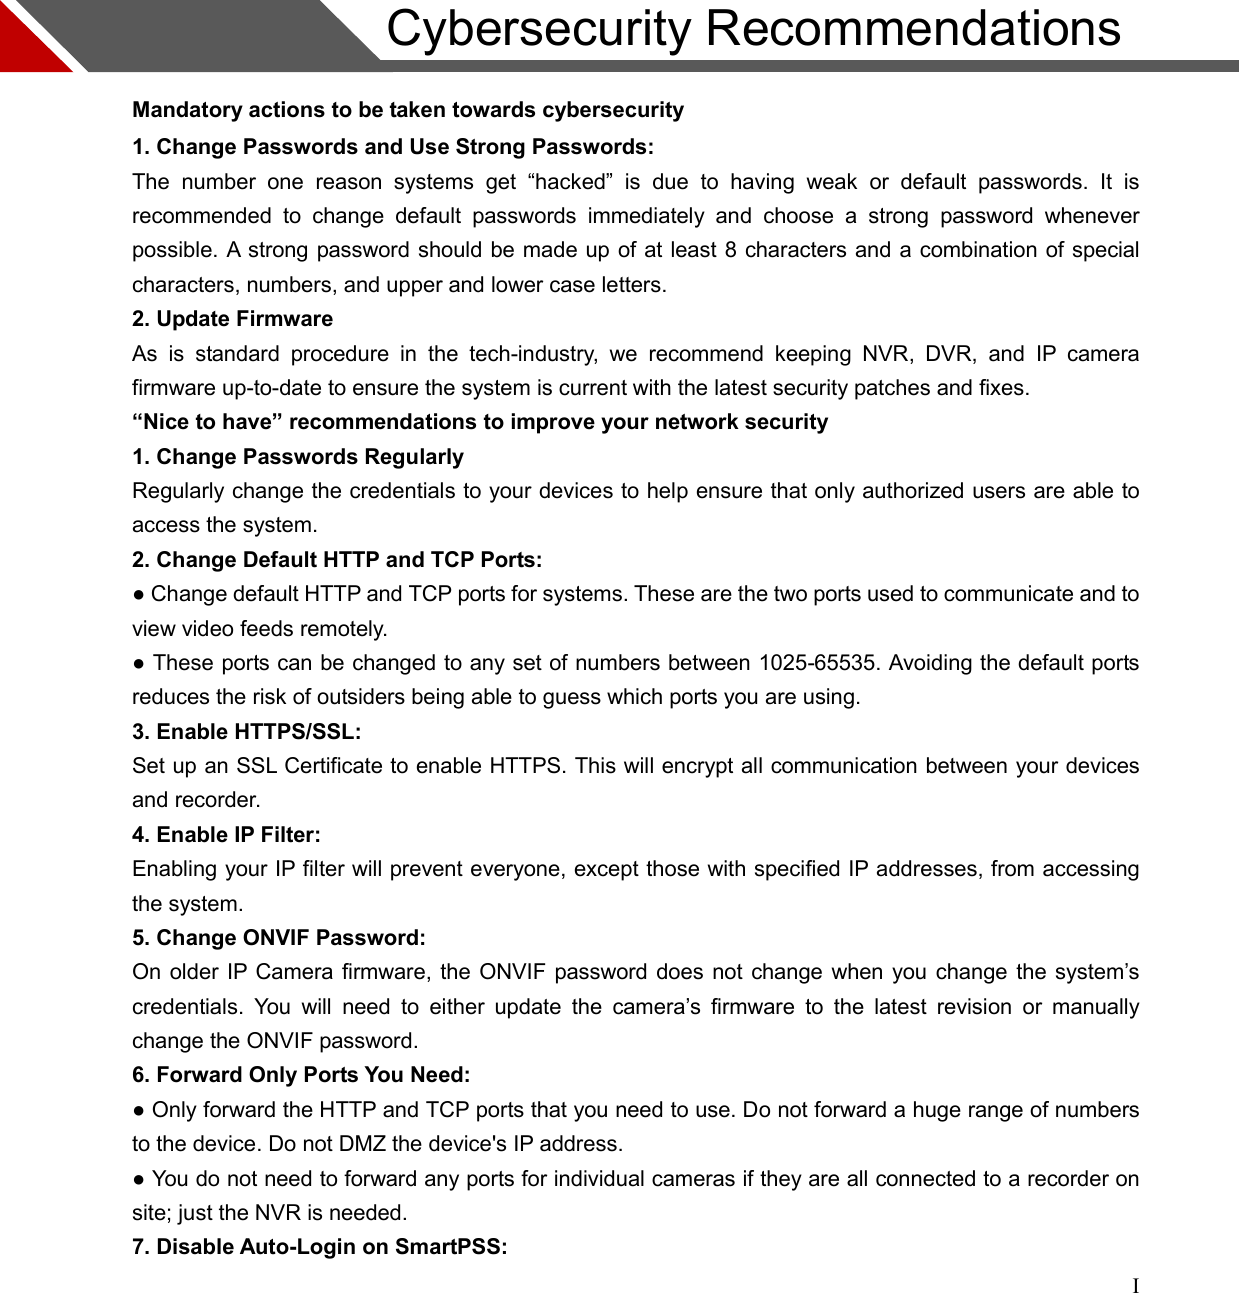 I                     Cybersecurity Recommendations                                                       Mandatory actions to be taken towards cybersecurity 1. Change Passwords and Use Strong Passwords: The  number  one  reason  systems  get  “hacked”  is  due  to  having  weak  or  default  passwords.  It  is recommended  to  change  default  passwords  immediately  and  choose  a  strong  password  whenever possible. A strong password should be made up of at least 8 characters and a combination of special characters, numbers, and upper and lower case letters. 2. Update Firmware As  is  standard  procedure  in  the  tech-industry,  we  recommend  keeping  NVR,  DVR,  and  IP  camera firmware up-to-date to ensure the system is current with the latest security patches and fixes. “Nice to have” recommendations to improve your network security 1. Change Passwords Regularly Regularly change the credentials to your devices to help ensure that only authorized users are able to access the system. 2. Change Default HTTP and TCP Ports: ● Change default HTTP and TCP ports for systems. These are the two ports used to communicate and to view video feeds remotely. ● These ports can be changed to any set of numbers between 1025-65535. Avoiding the default ports reduces the risk of outsiders being able to guess which ports you are using. 3. Enable HTTPS/SSL: Set up an SSL Certificate to enable HTTPS. This will encrypt all communication between your devices and recorder. 4. Enable IP Filter: Enabling your IP filter will prevent everyone, except those with specified IP addresses, from accessing the system. 5. Change ONVIF Password: On older IP Camera firmware, the ONVIF password does not change when you change the system’s credentials.  You  will  need  to  either  update  the  camera’s  firmware  to  the  latest  revision  or  manually change the ONVIF password. 6. Forward Only Ports You Need: ● Only forward the HTTP and TCP ports that you need to use. Do not forward a huge range of numbers to the device. Do not DMZ the device&apos;s IP address. ● You do not need to forward any ports for individual cameras if they are all connected to a recorder on site; just the NVR is needed. 7. Disable Auto-Login on SmartPSS:  